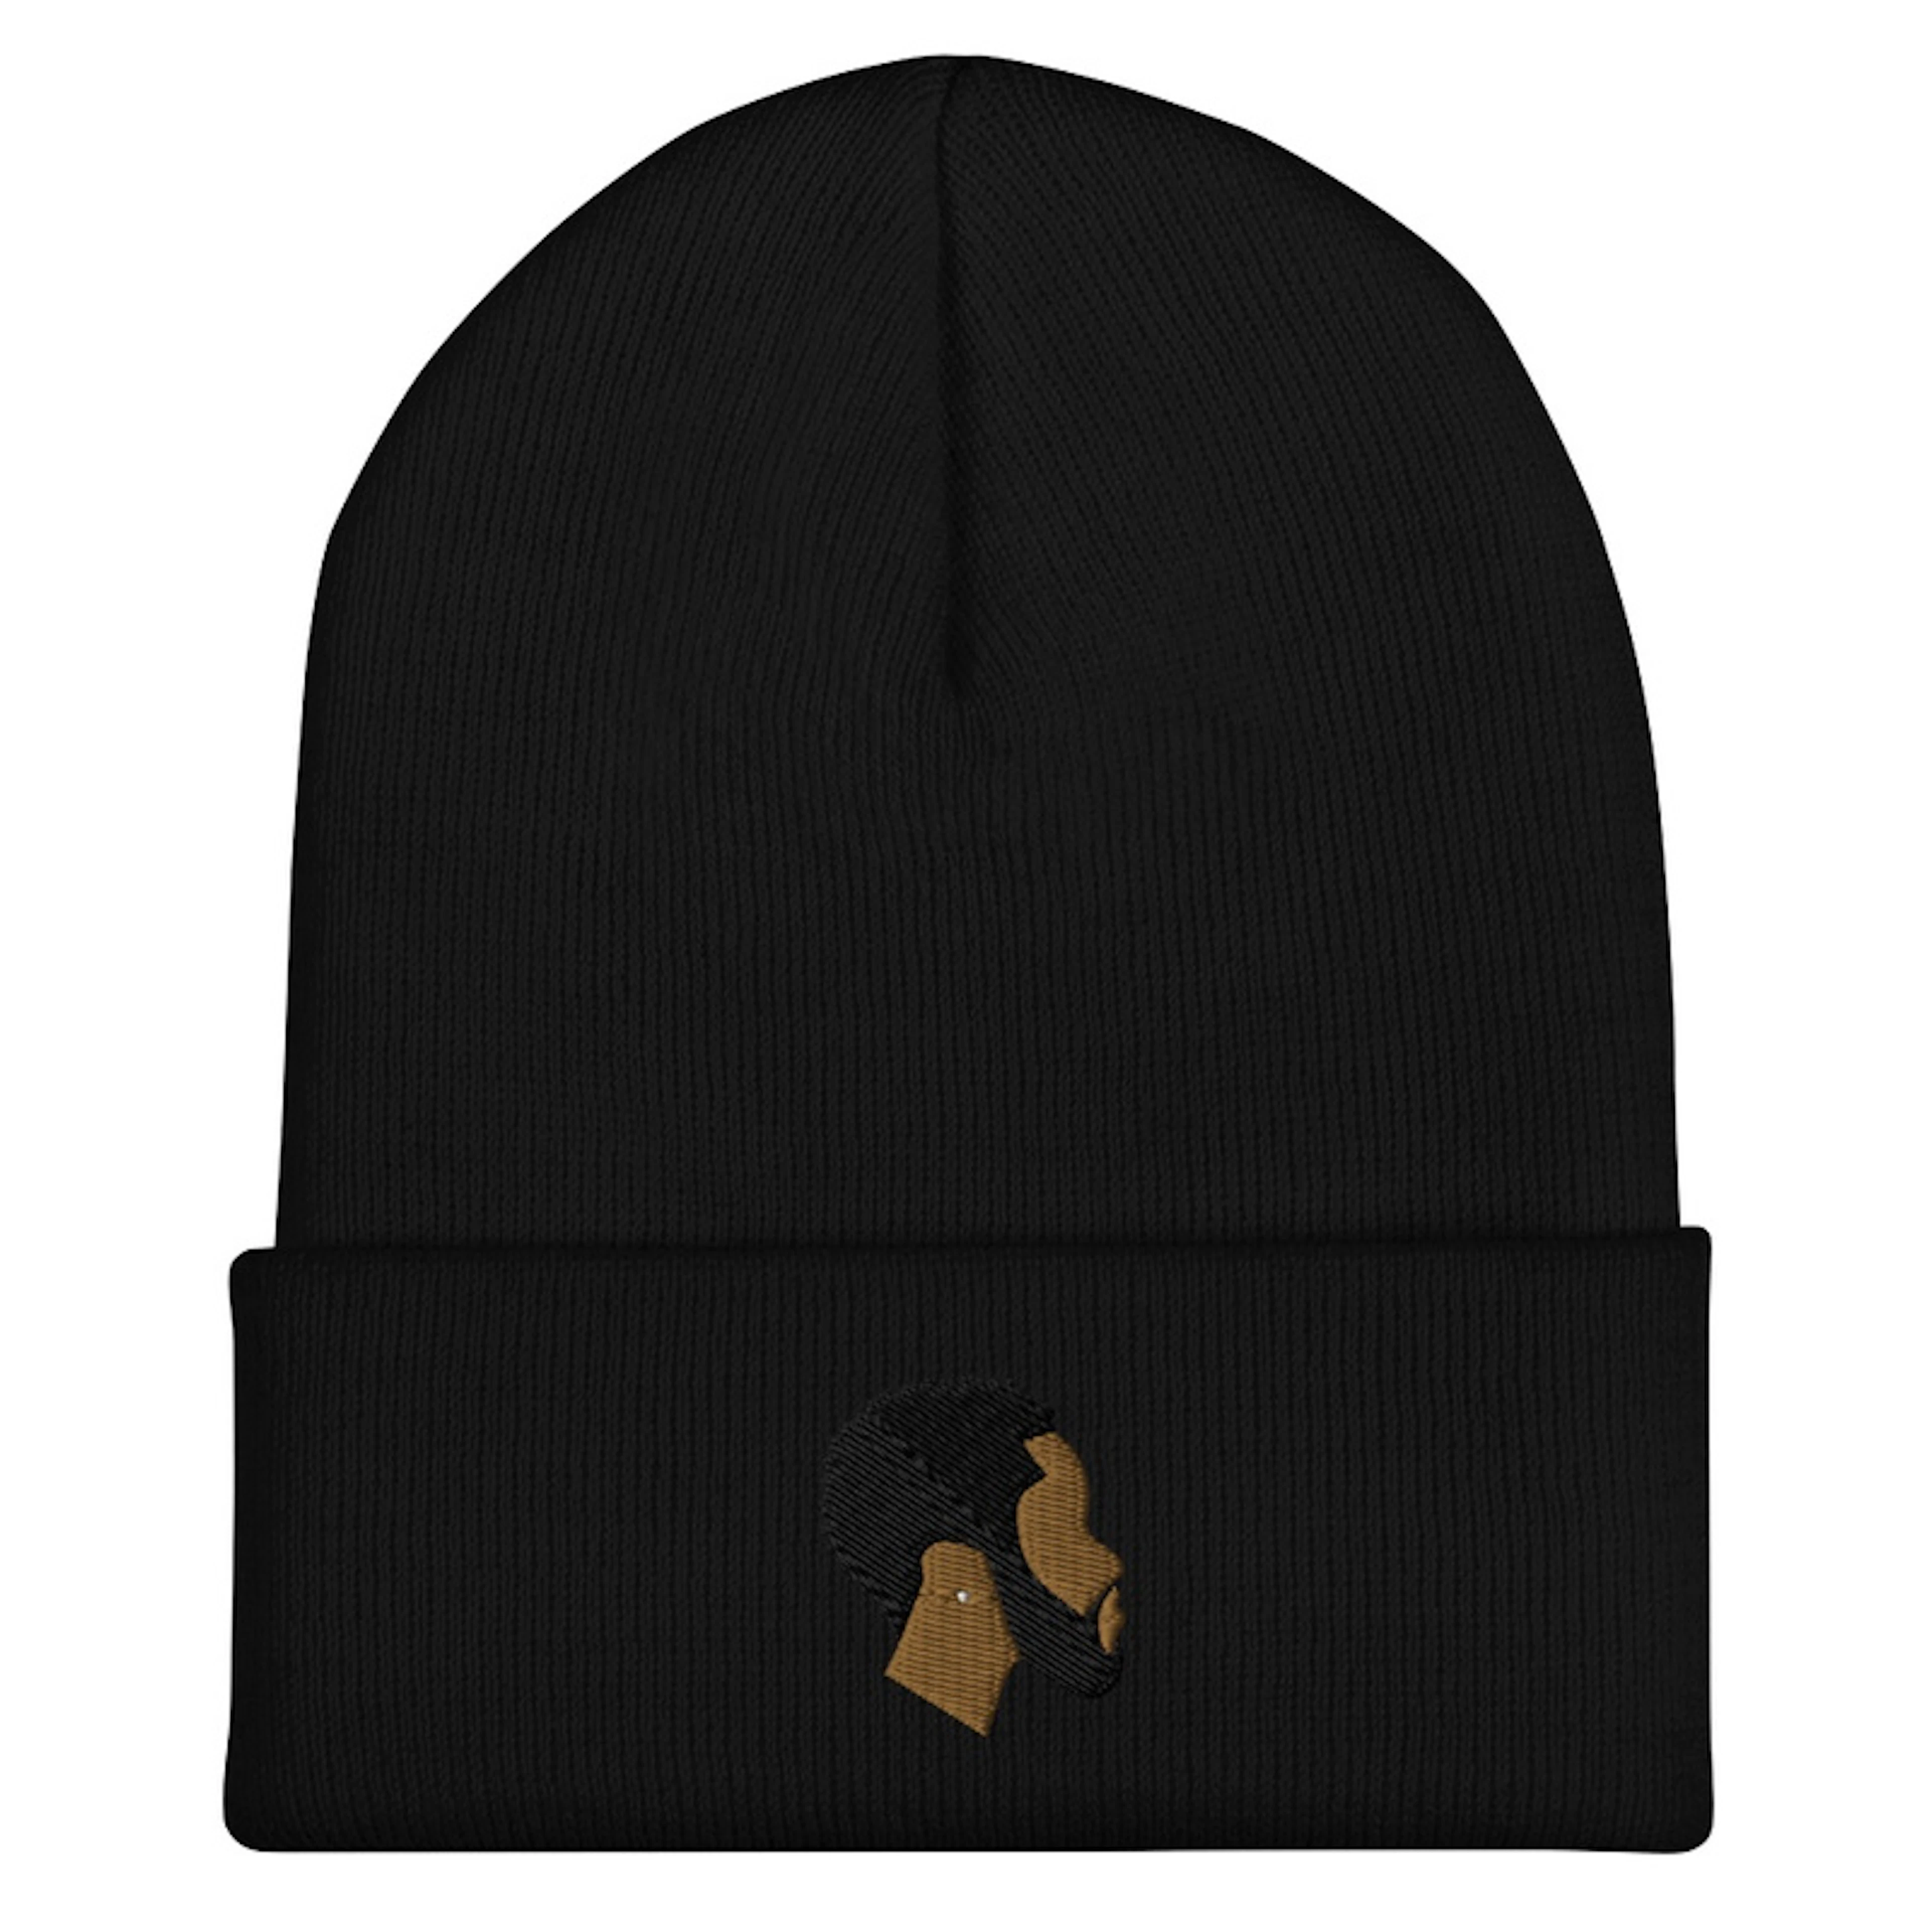 D. Rich head logo embroidered knit hat